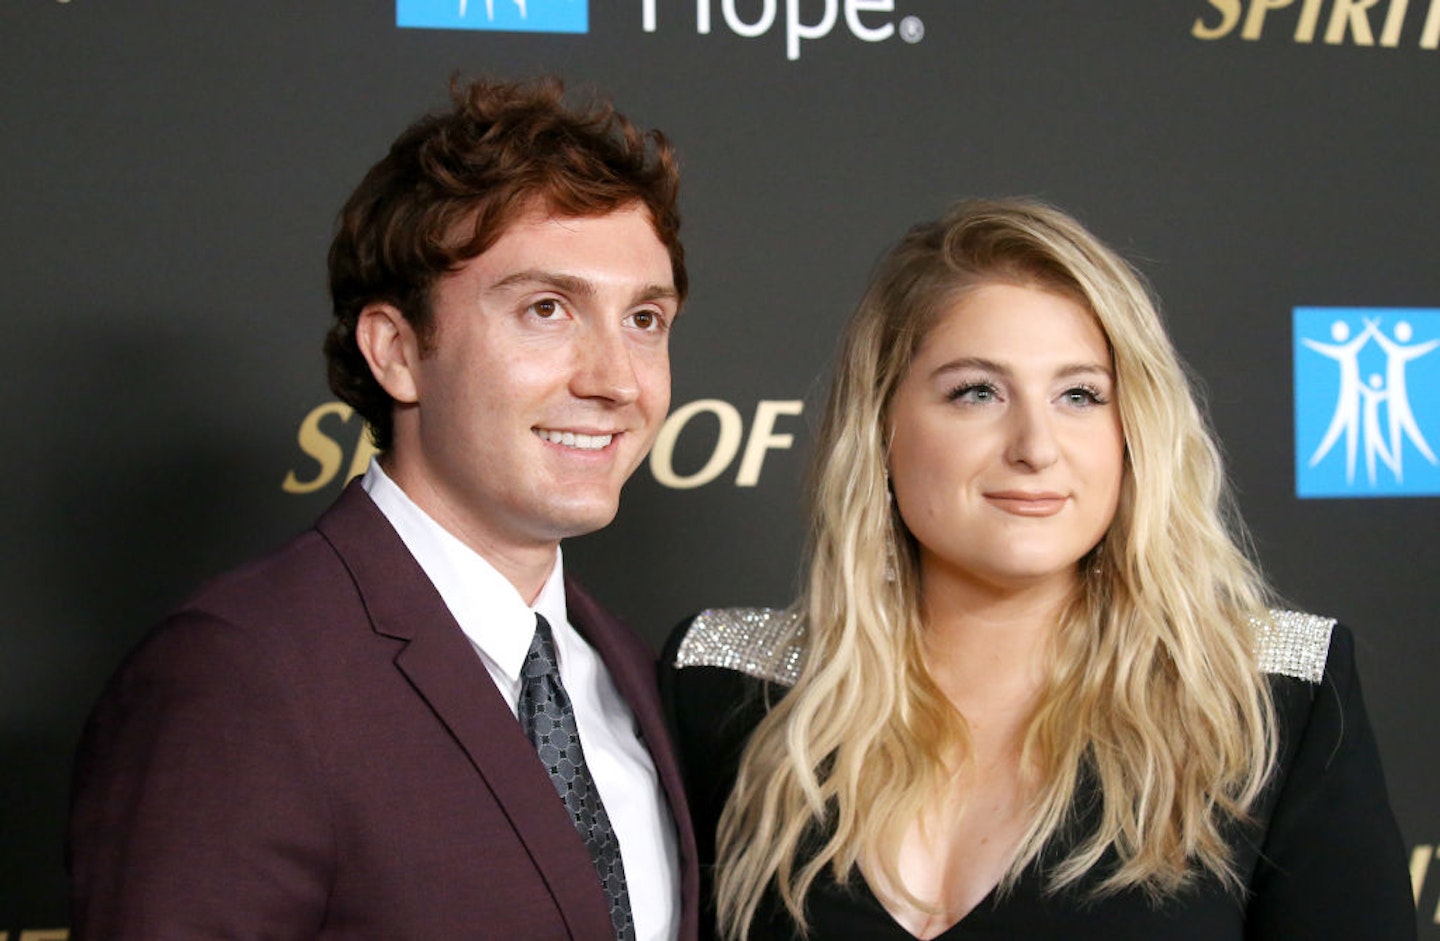 The reason Meghan Trainor and hubby have side-by-side toilets